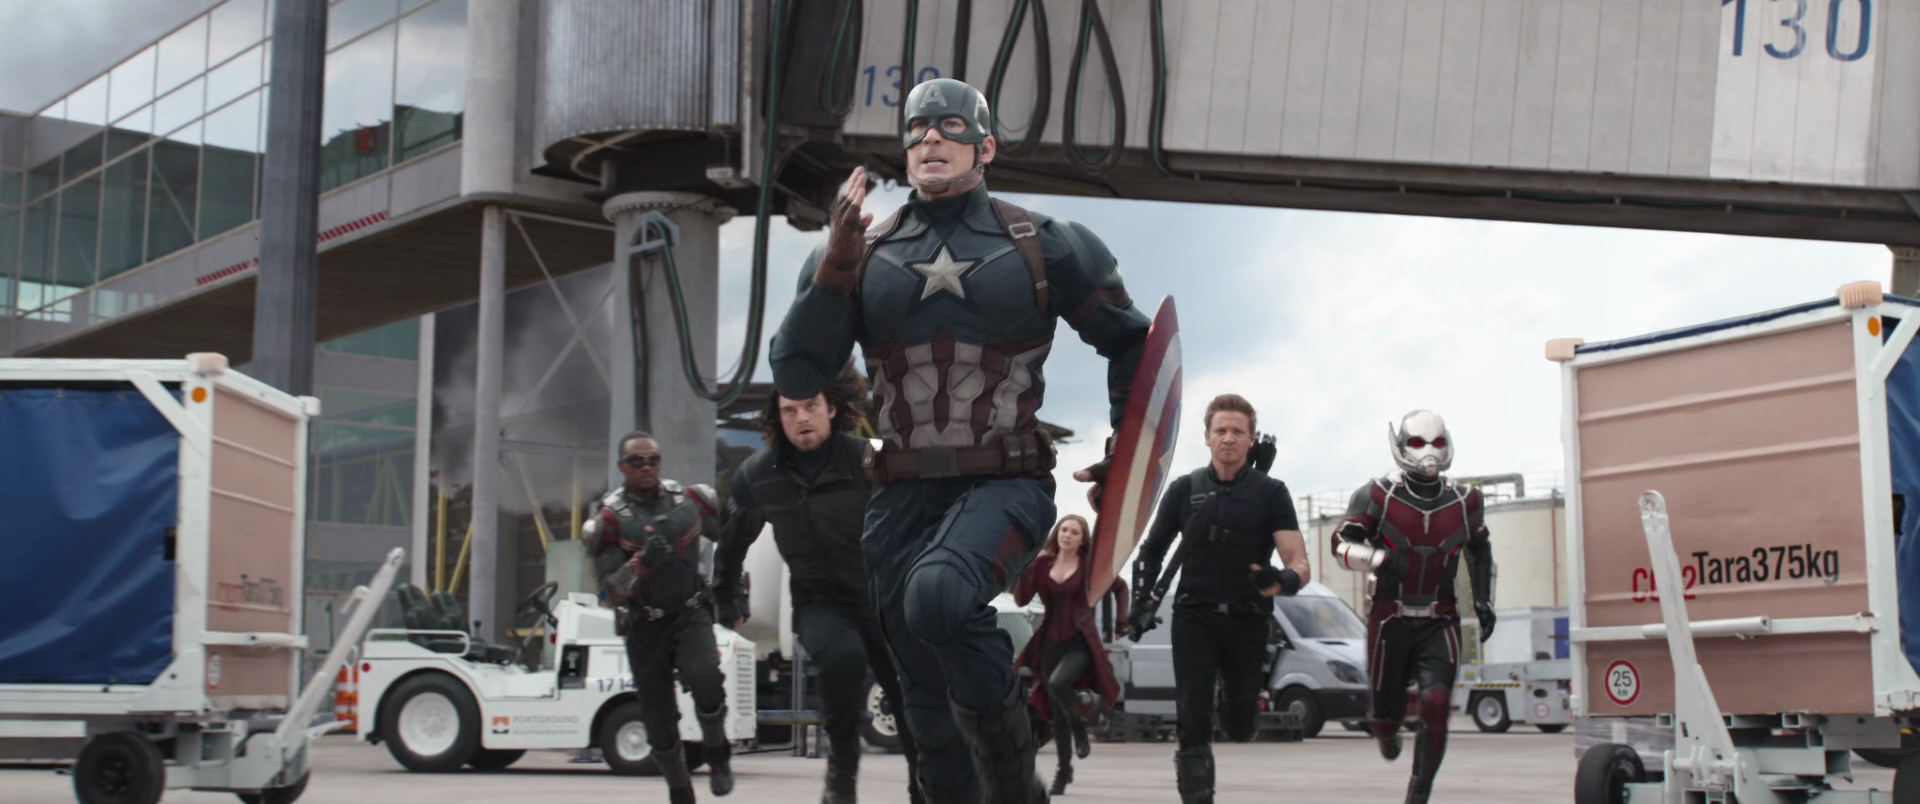 Captain America (Chris Evans) leads the Winter Soldier (Sebastian Stan), Hawkeye (Jeremy Renner), Ant-Man (Paul Rudd), the Falcon (Anthony Mackie) and the Scarlet Witch (Elizabeth Olsen) into battle against Iron Man's (Robert Downey Jr.) pro-registration Avengers in Captain America: Civil War (2016), Marvel Entertainment via Blu-ray